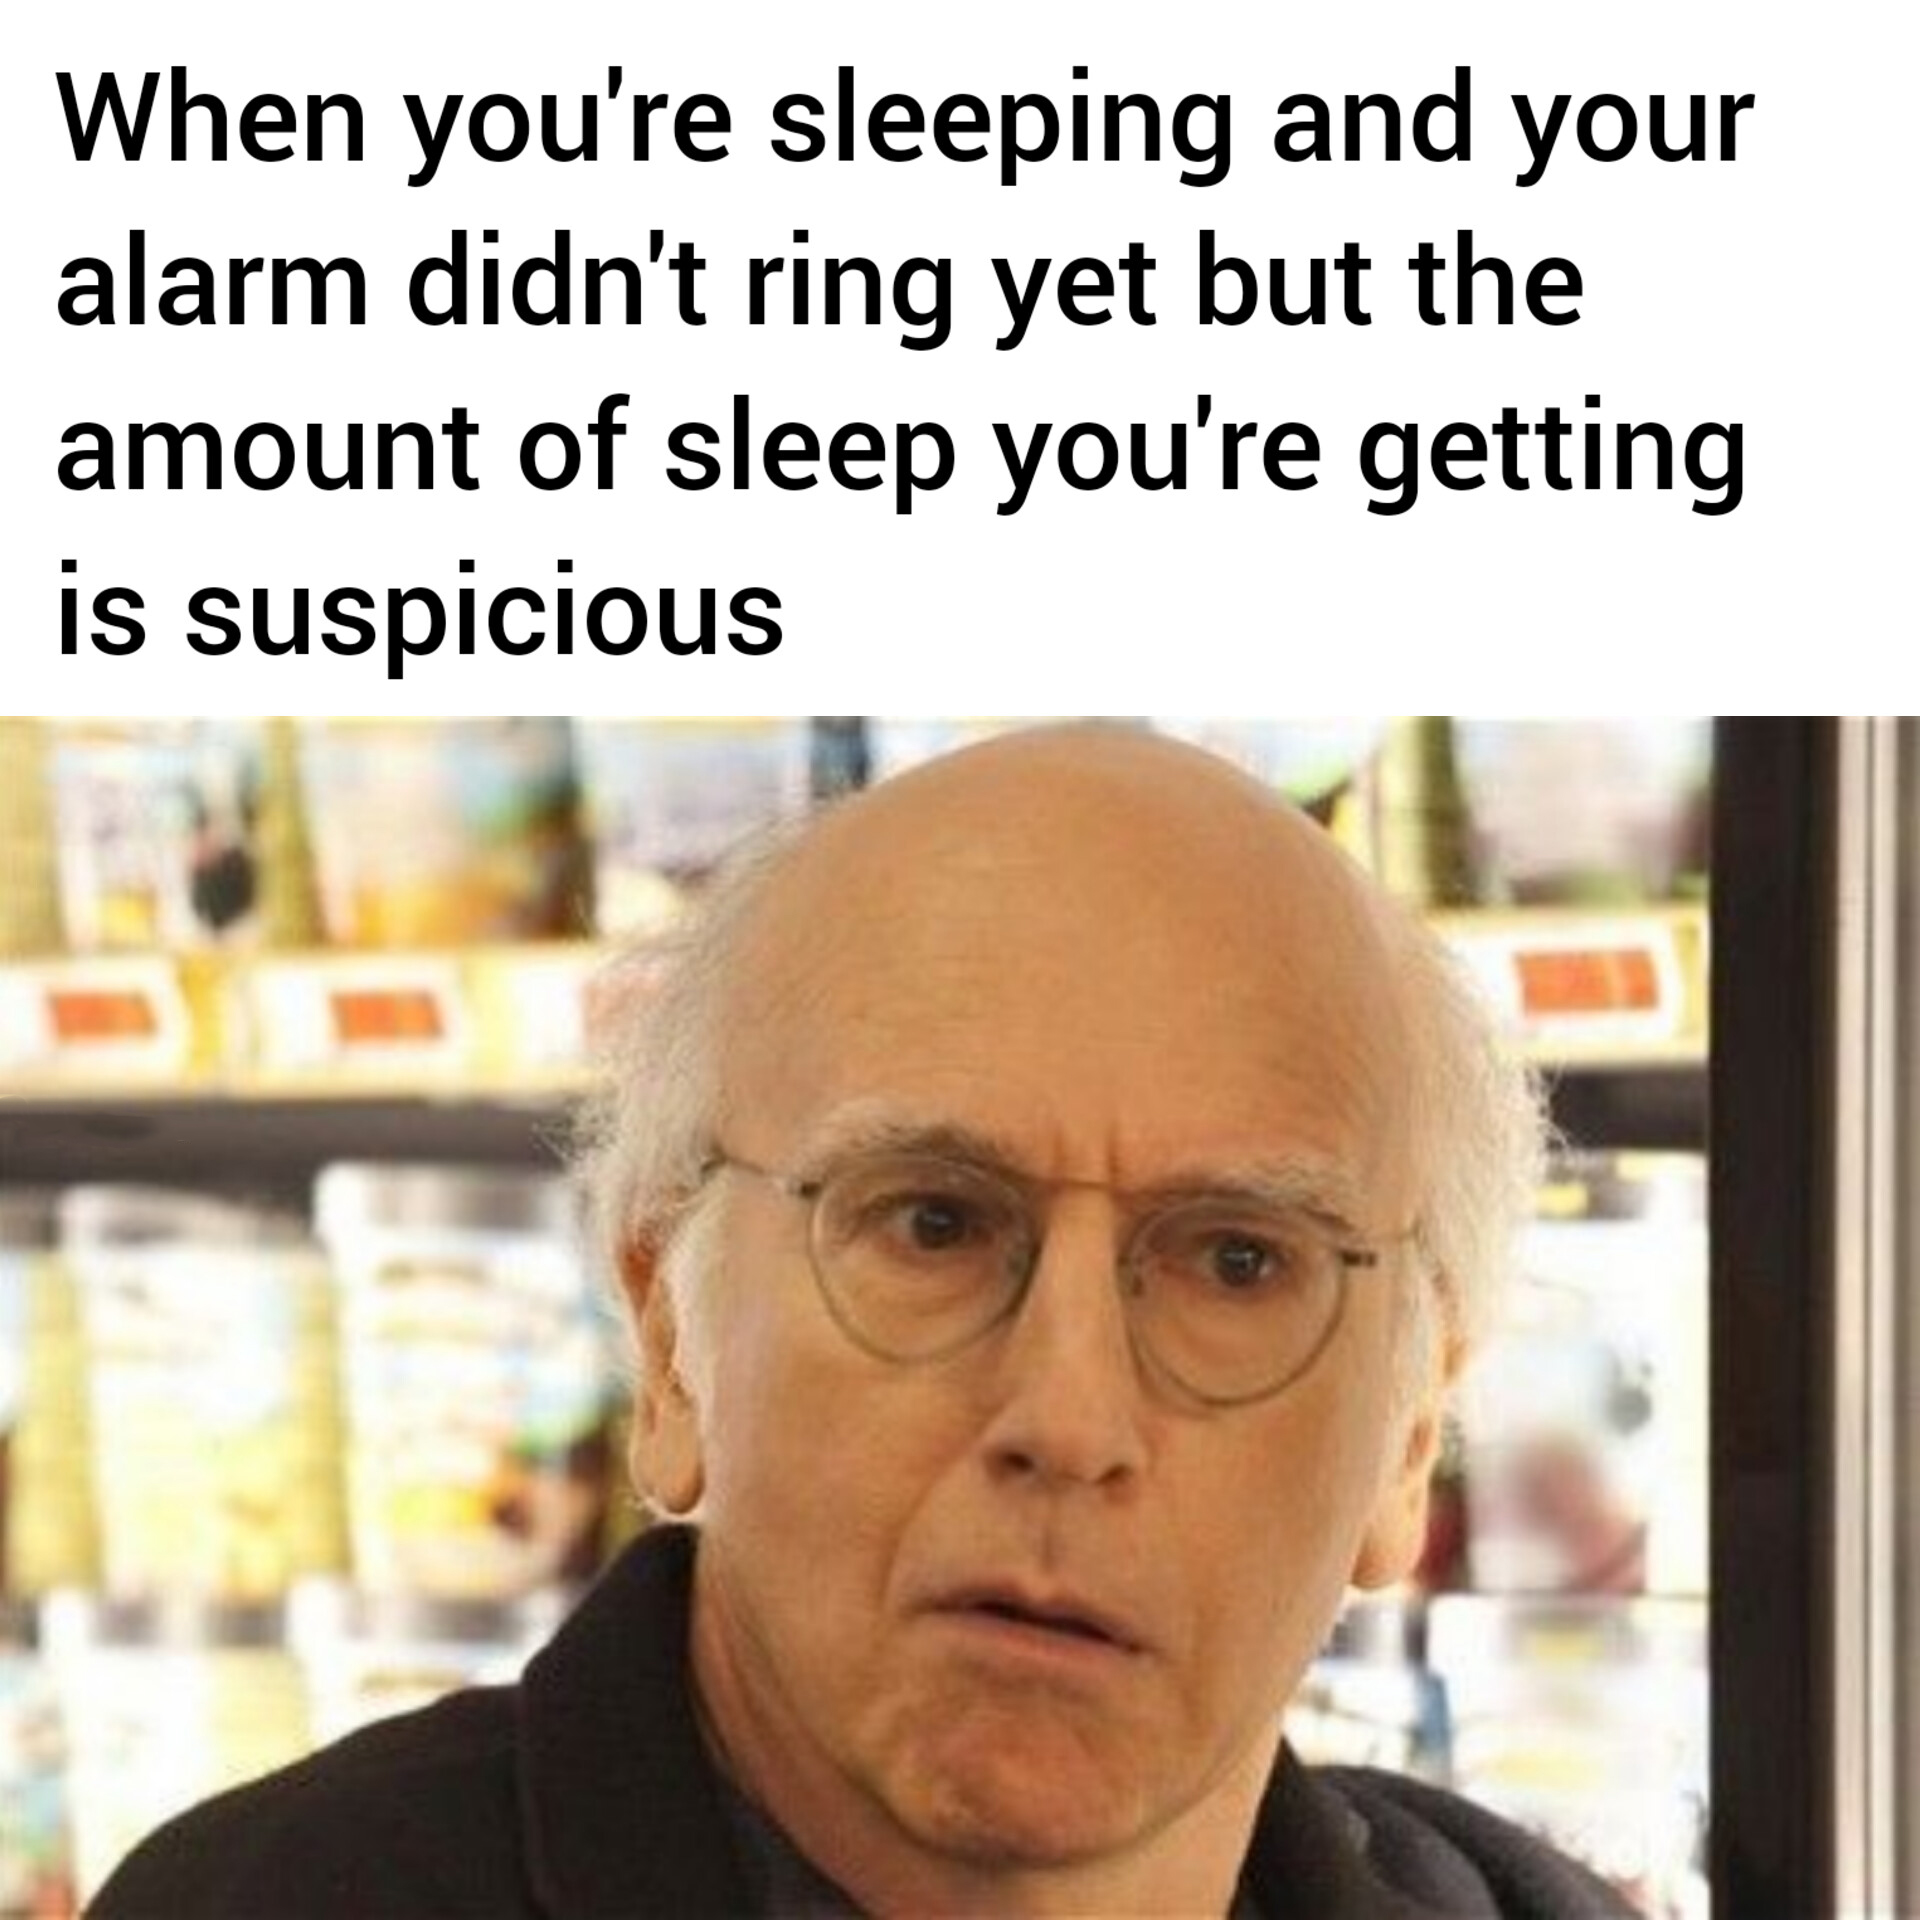 dank memes and pics - curb larry david face - When you're sleeping and your alarm didn't ring yet but the amount of sleep you're getting is suspicious